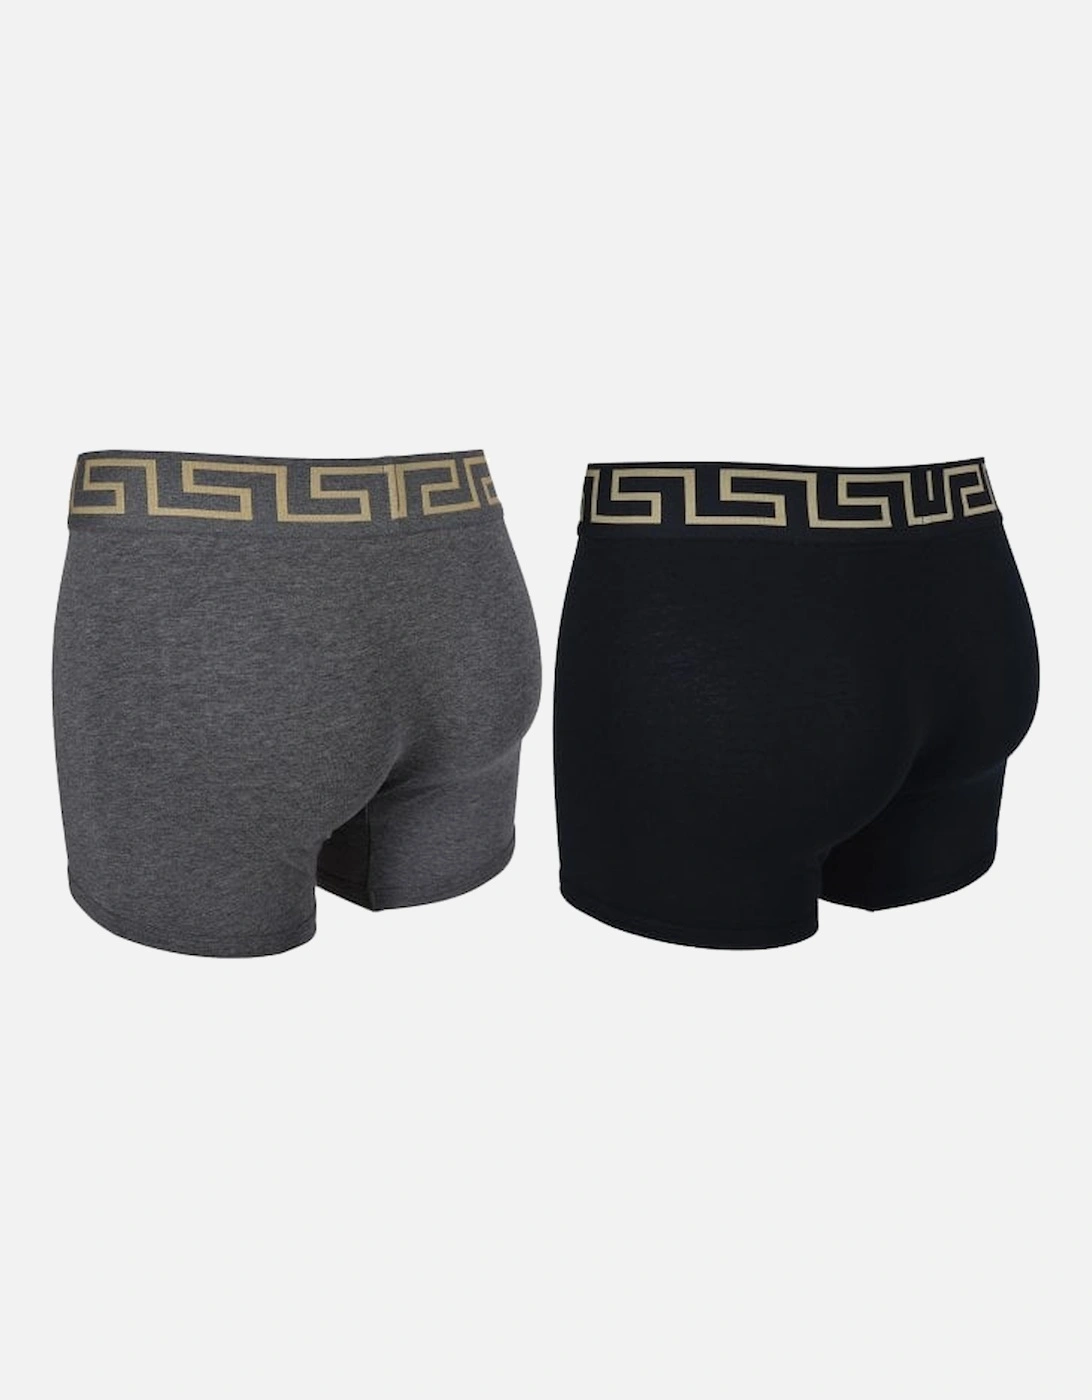 2-Pack Iconic Boxer Briefs, Black/Grey/gold